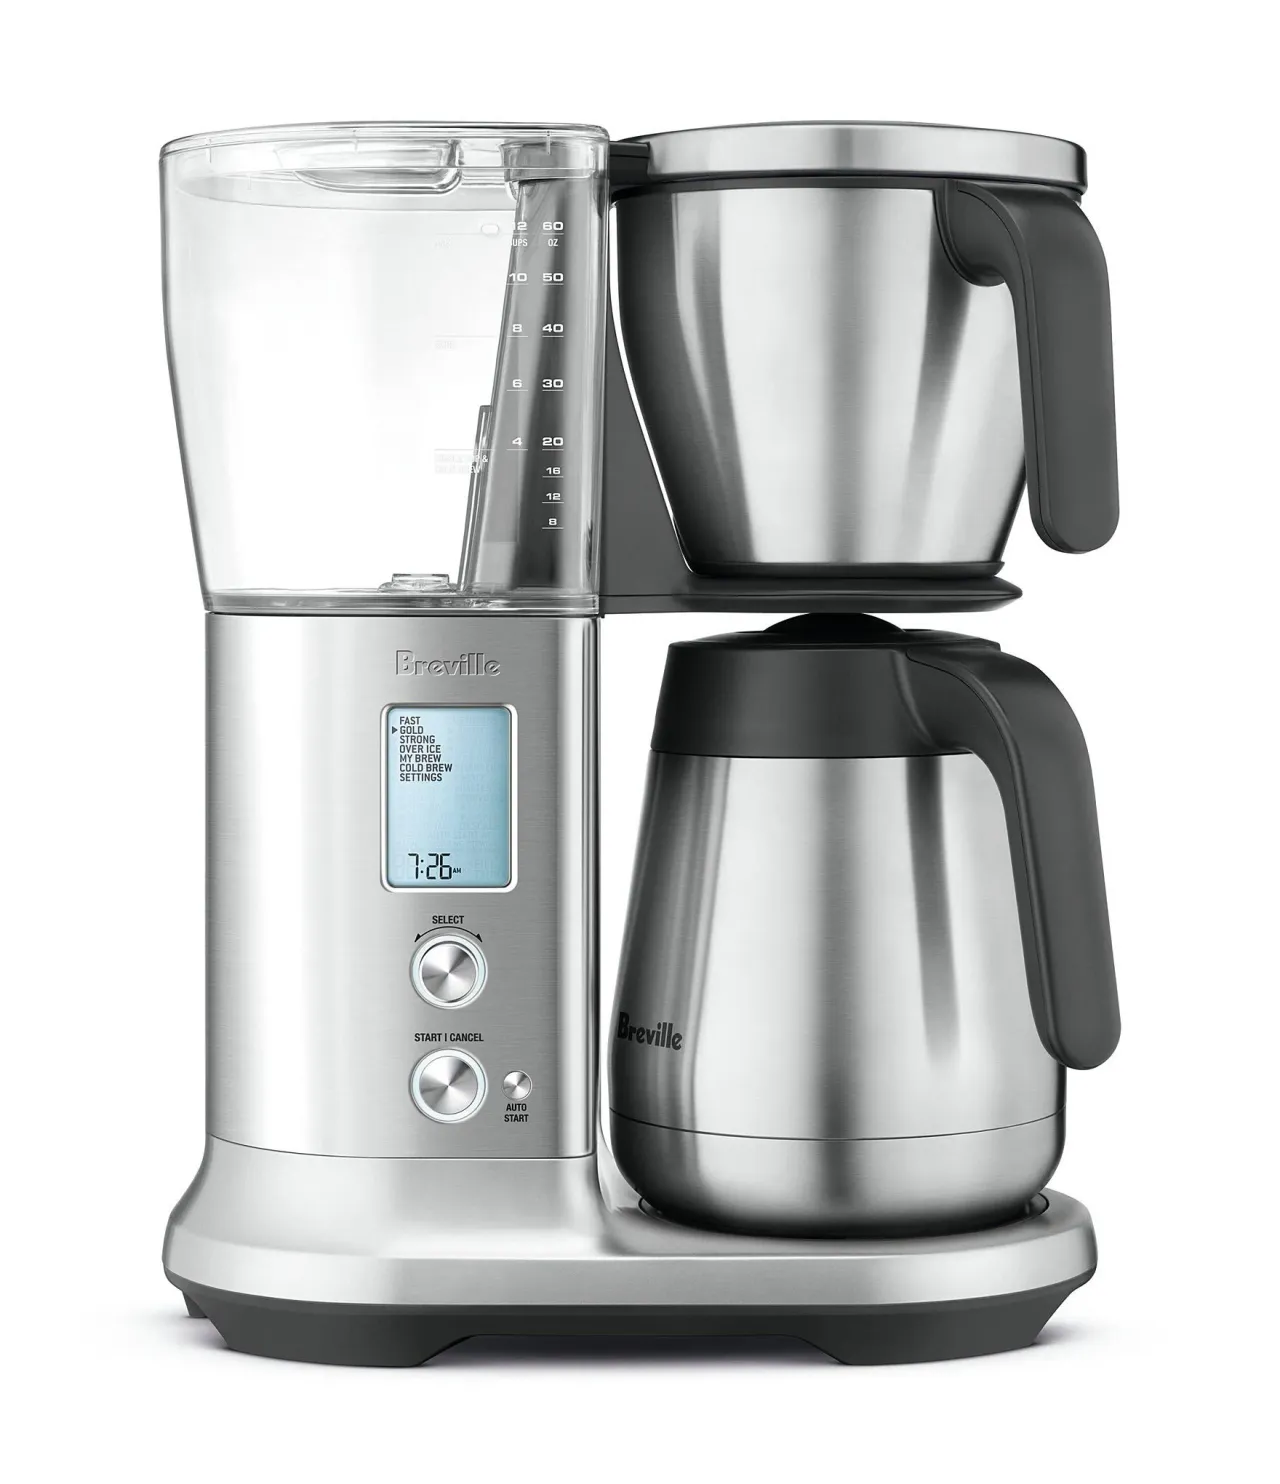 1 The 12-Cup Precision Hot Beverage Maker